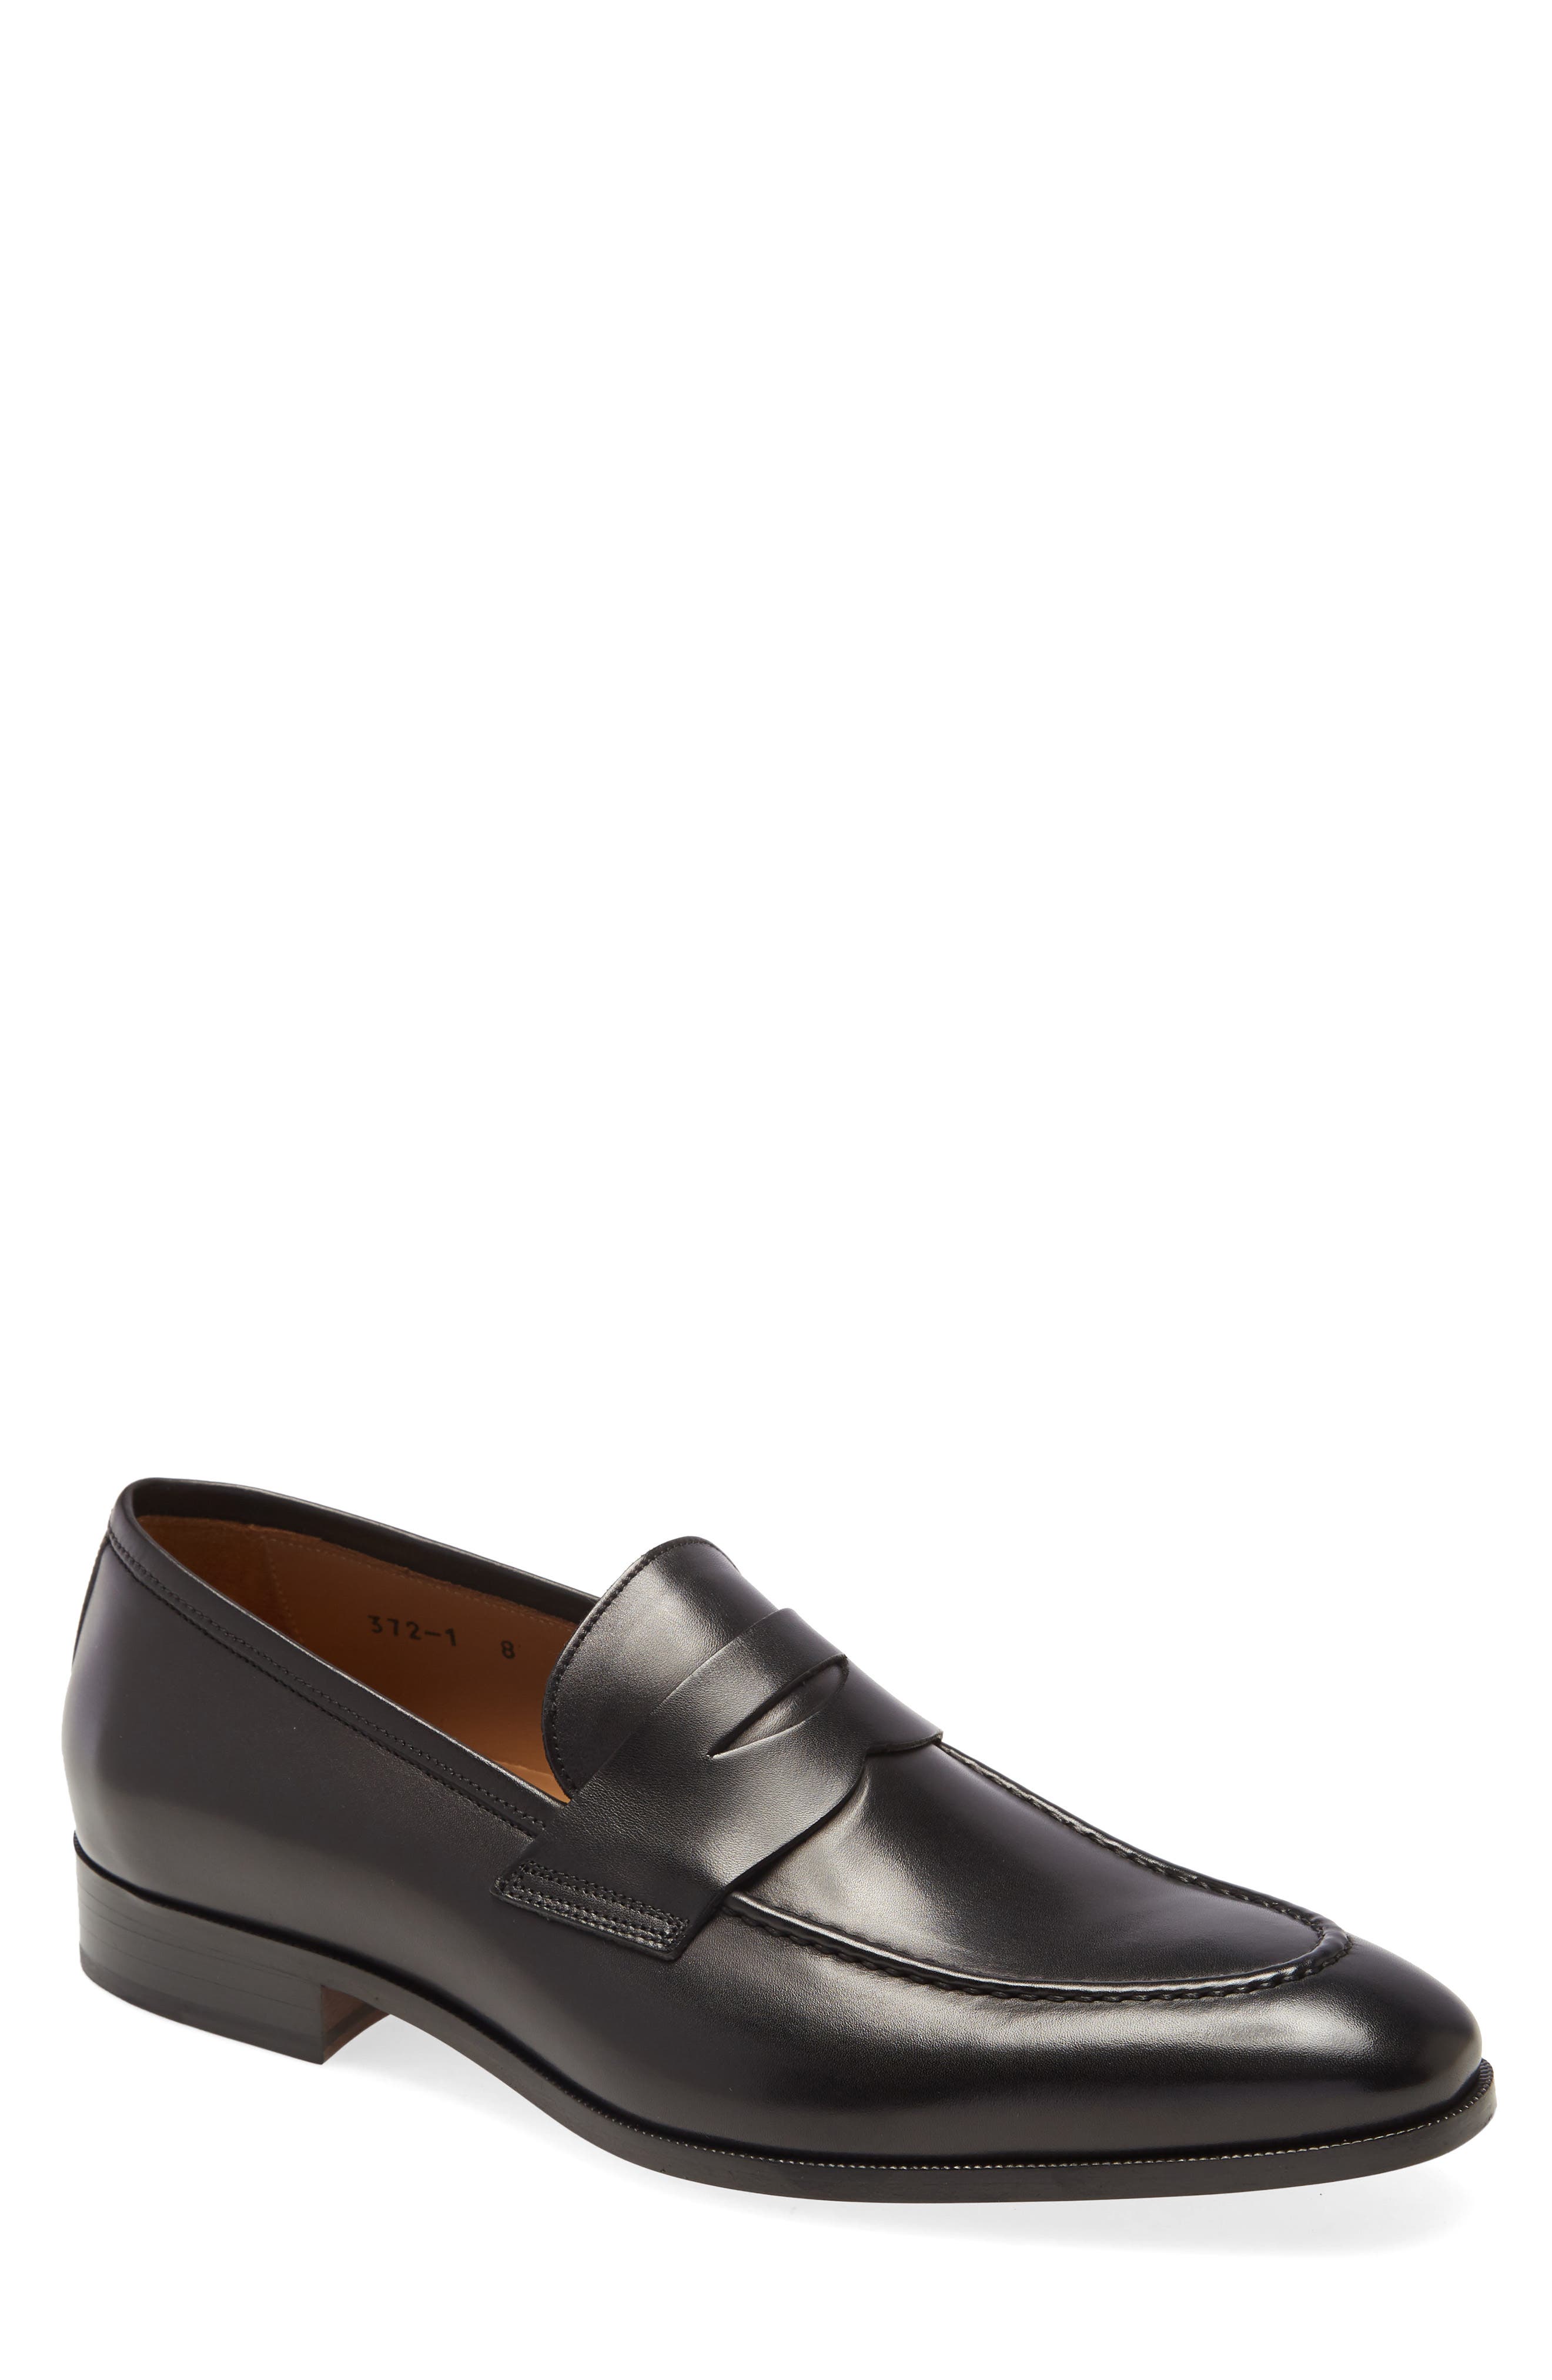 TO BOOT NEW YORK TESORO PENNY LOAFER,632449931623